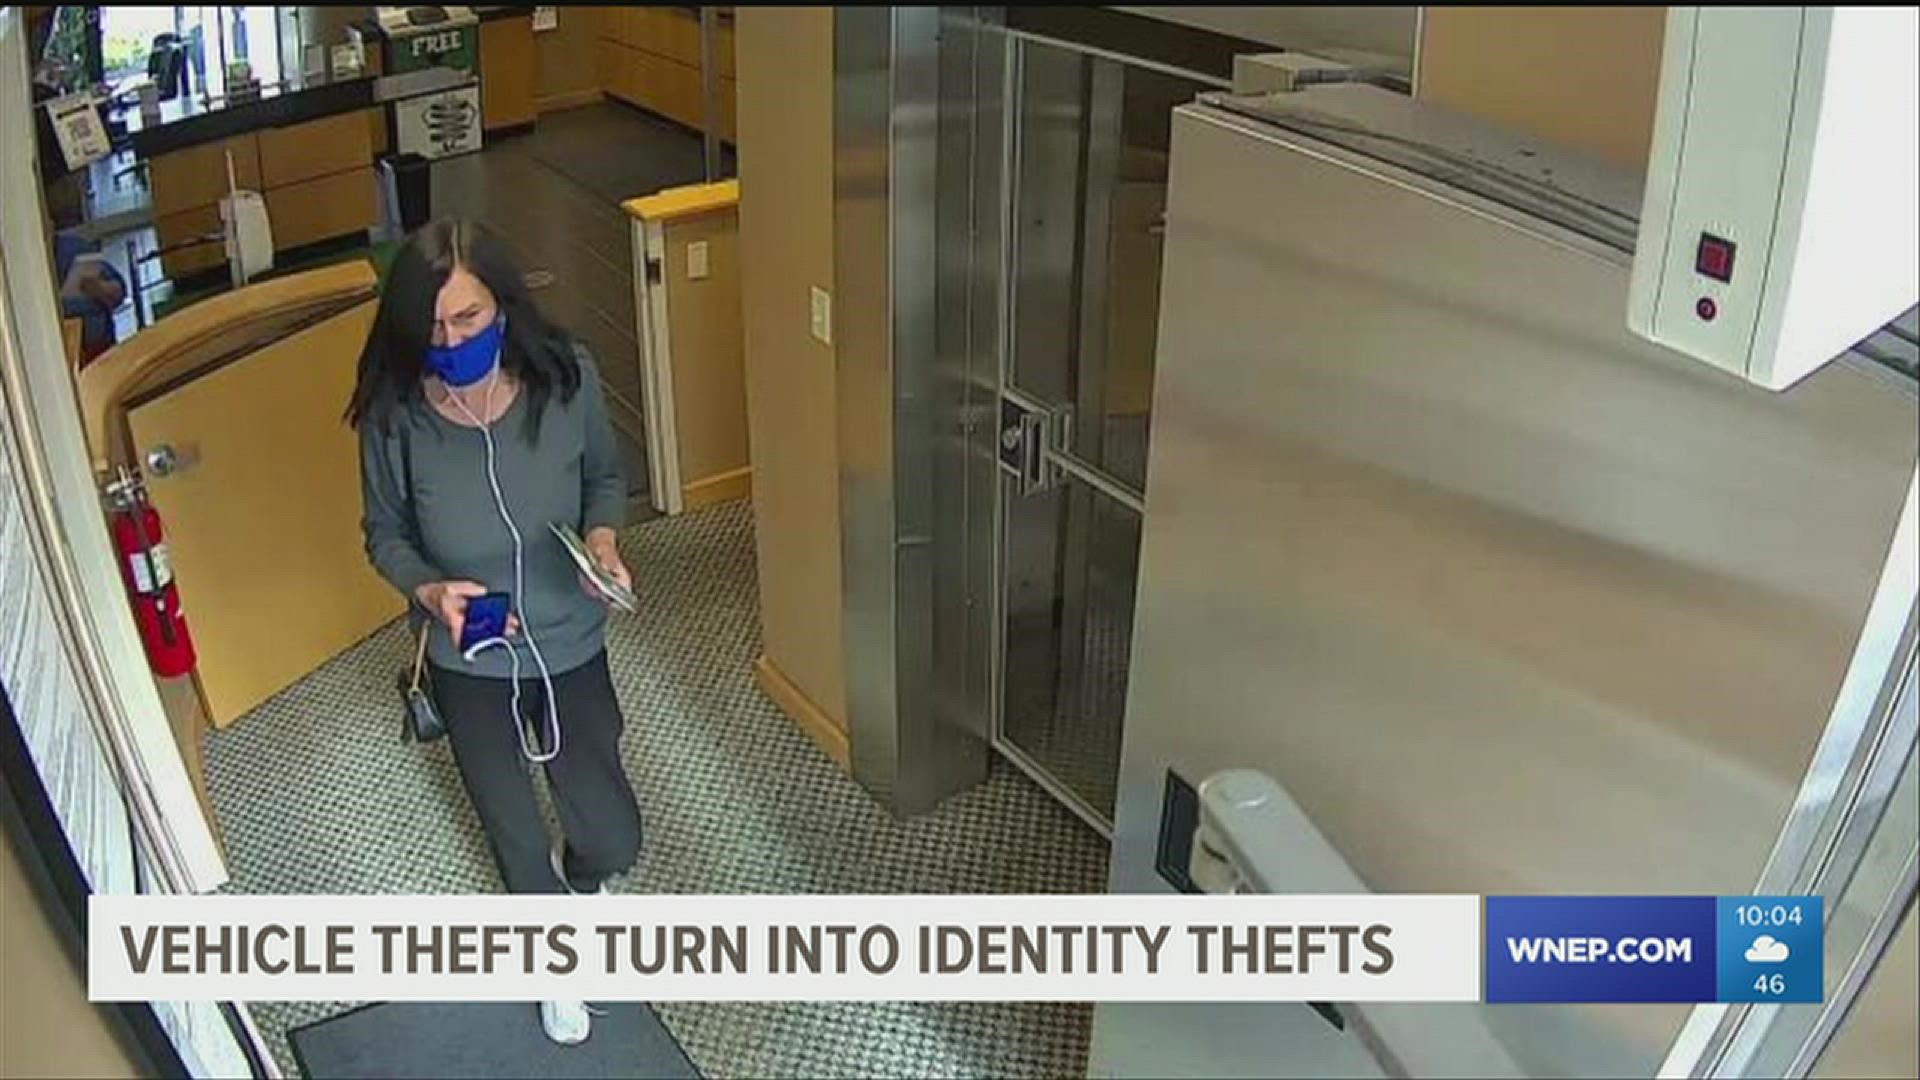 Officials say those shown in the surveillance pictures attempted to use victims identities at local banks.